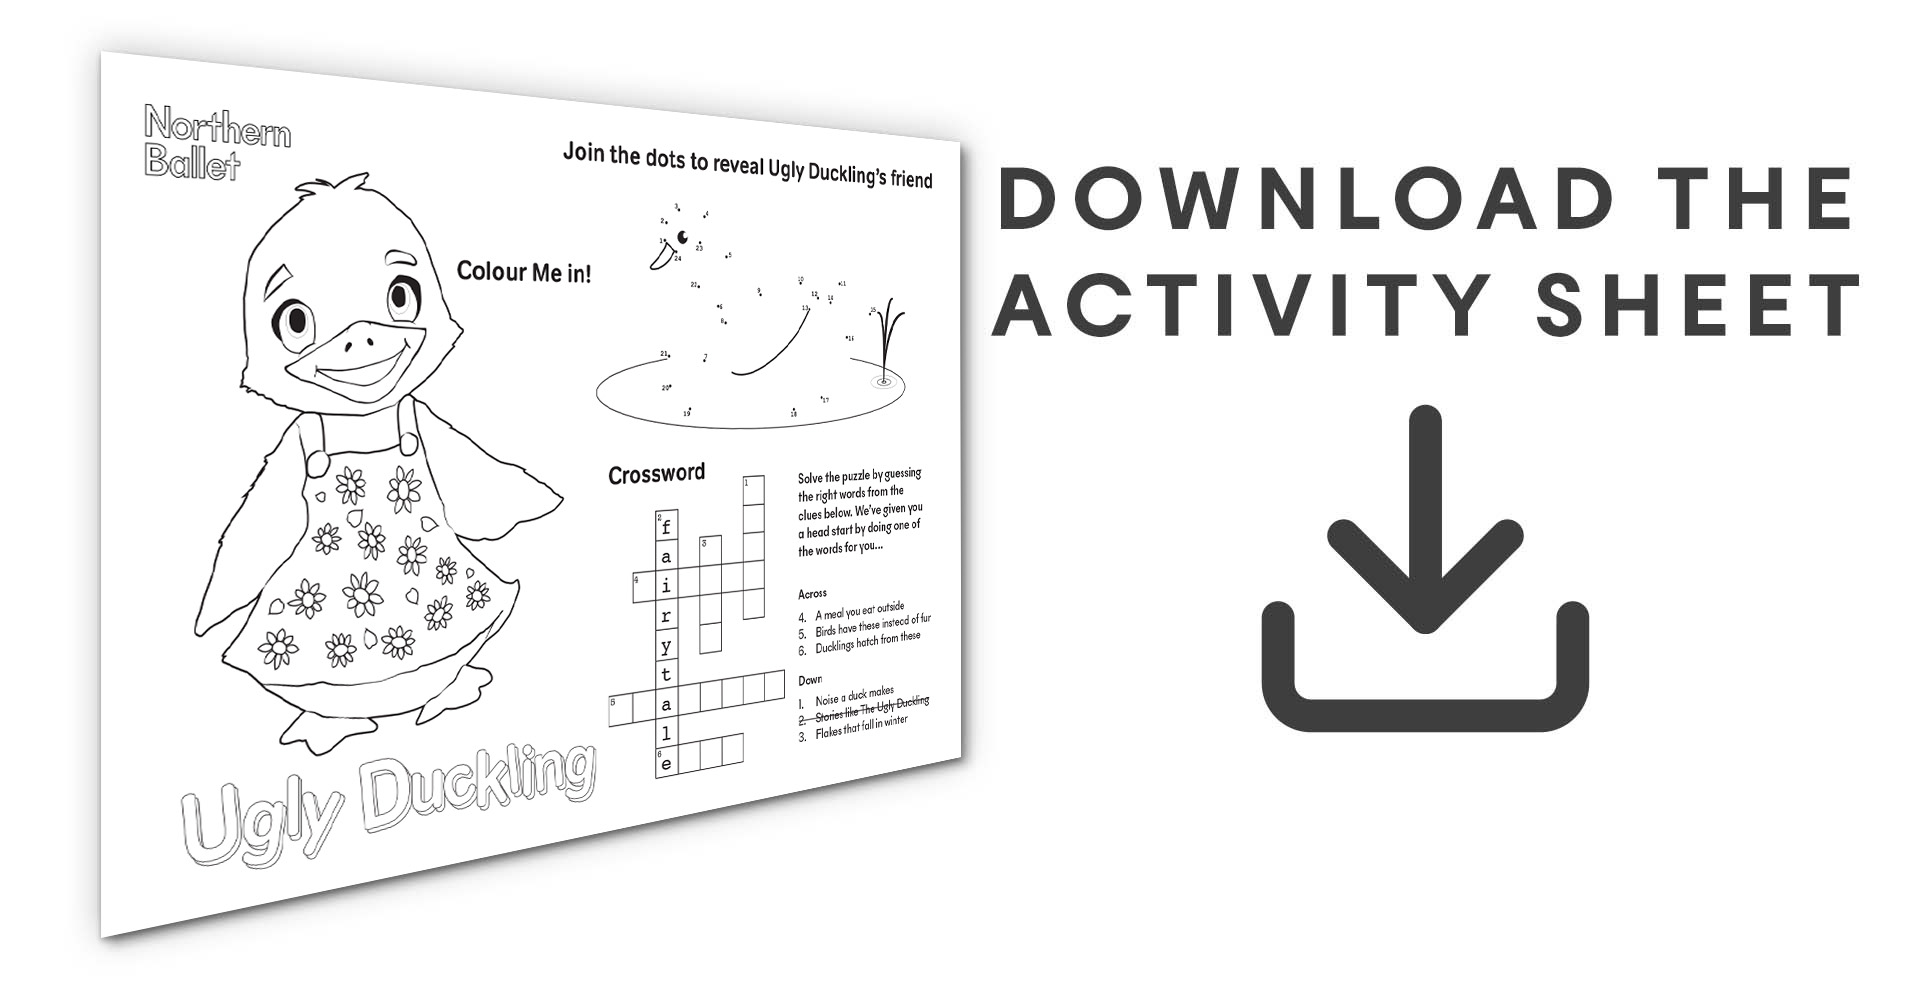 Download the activity sheet